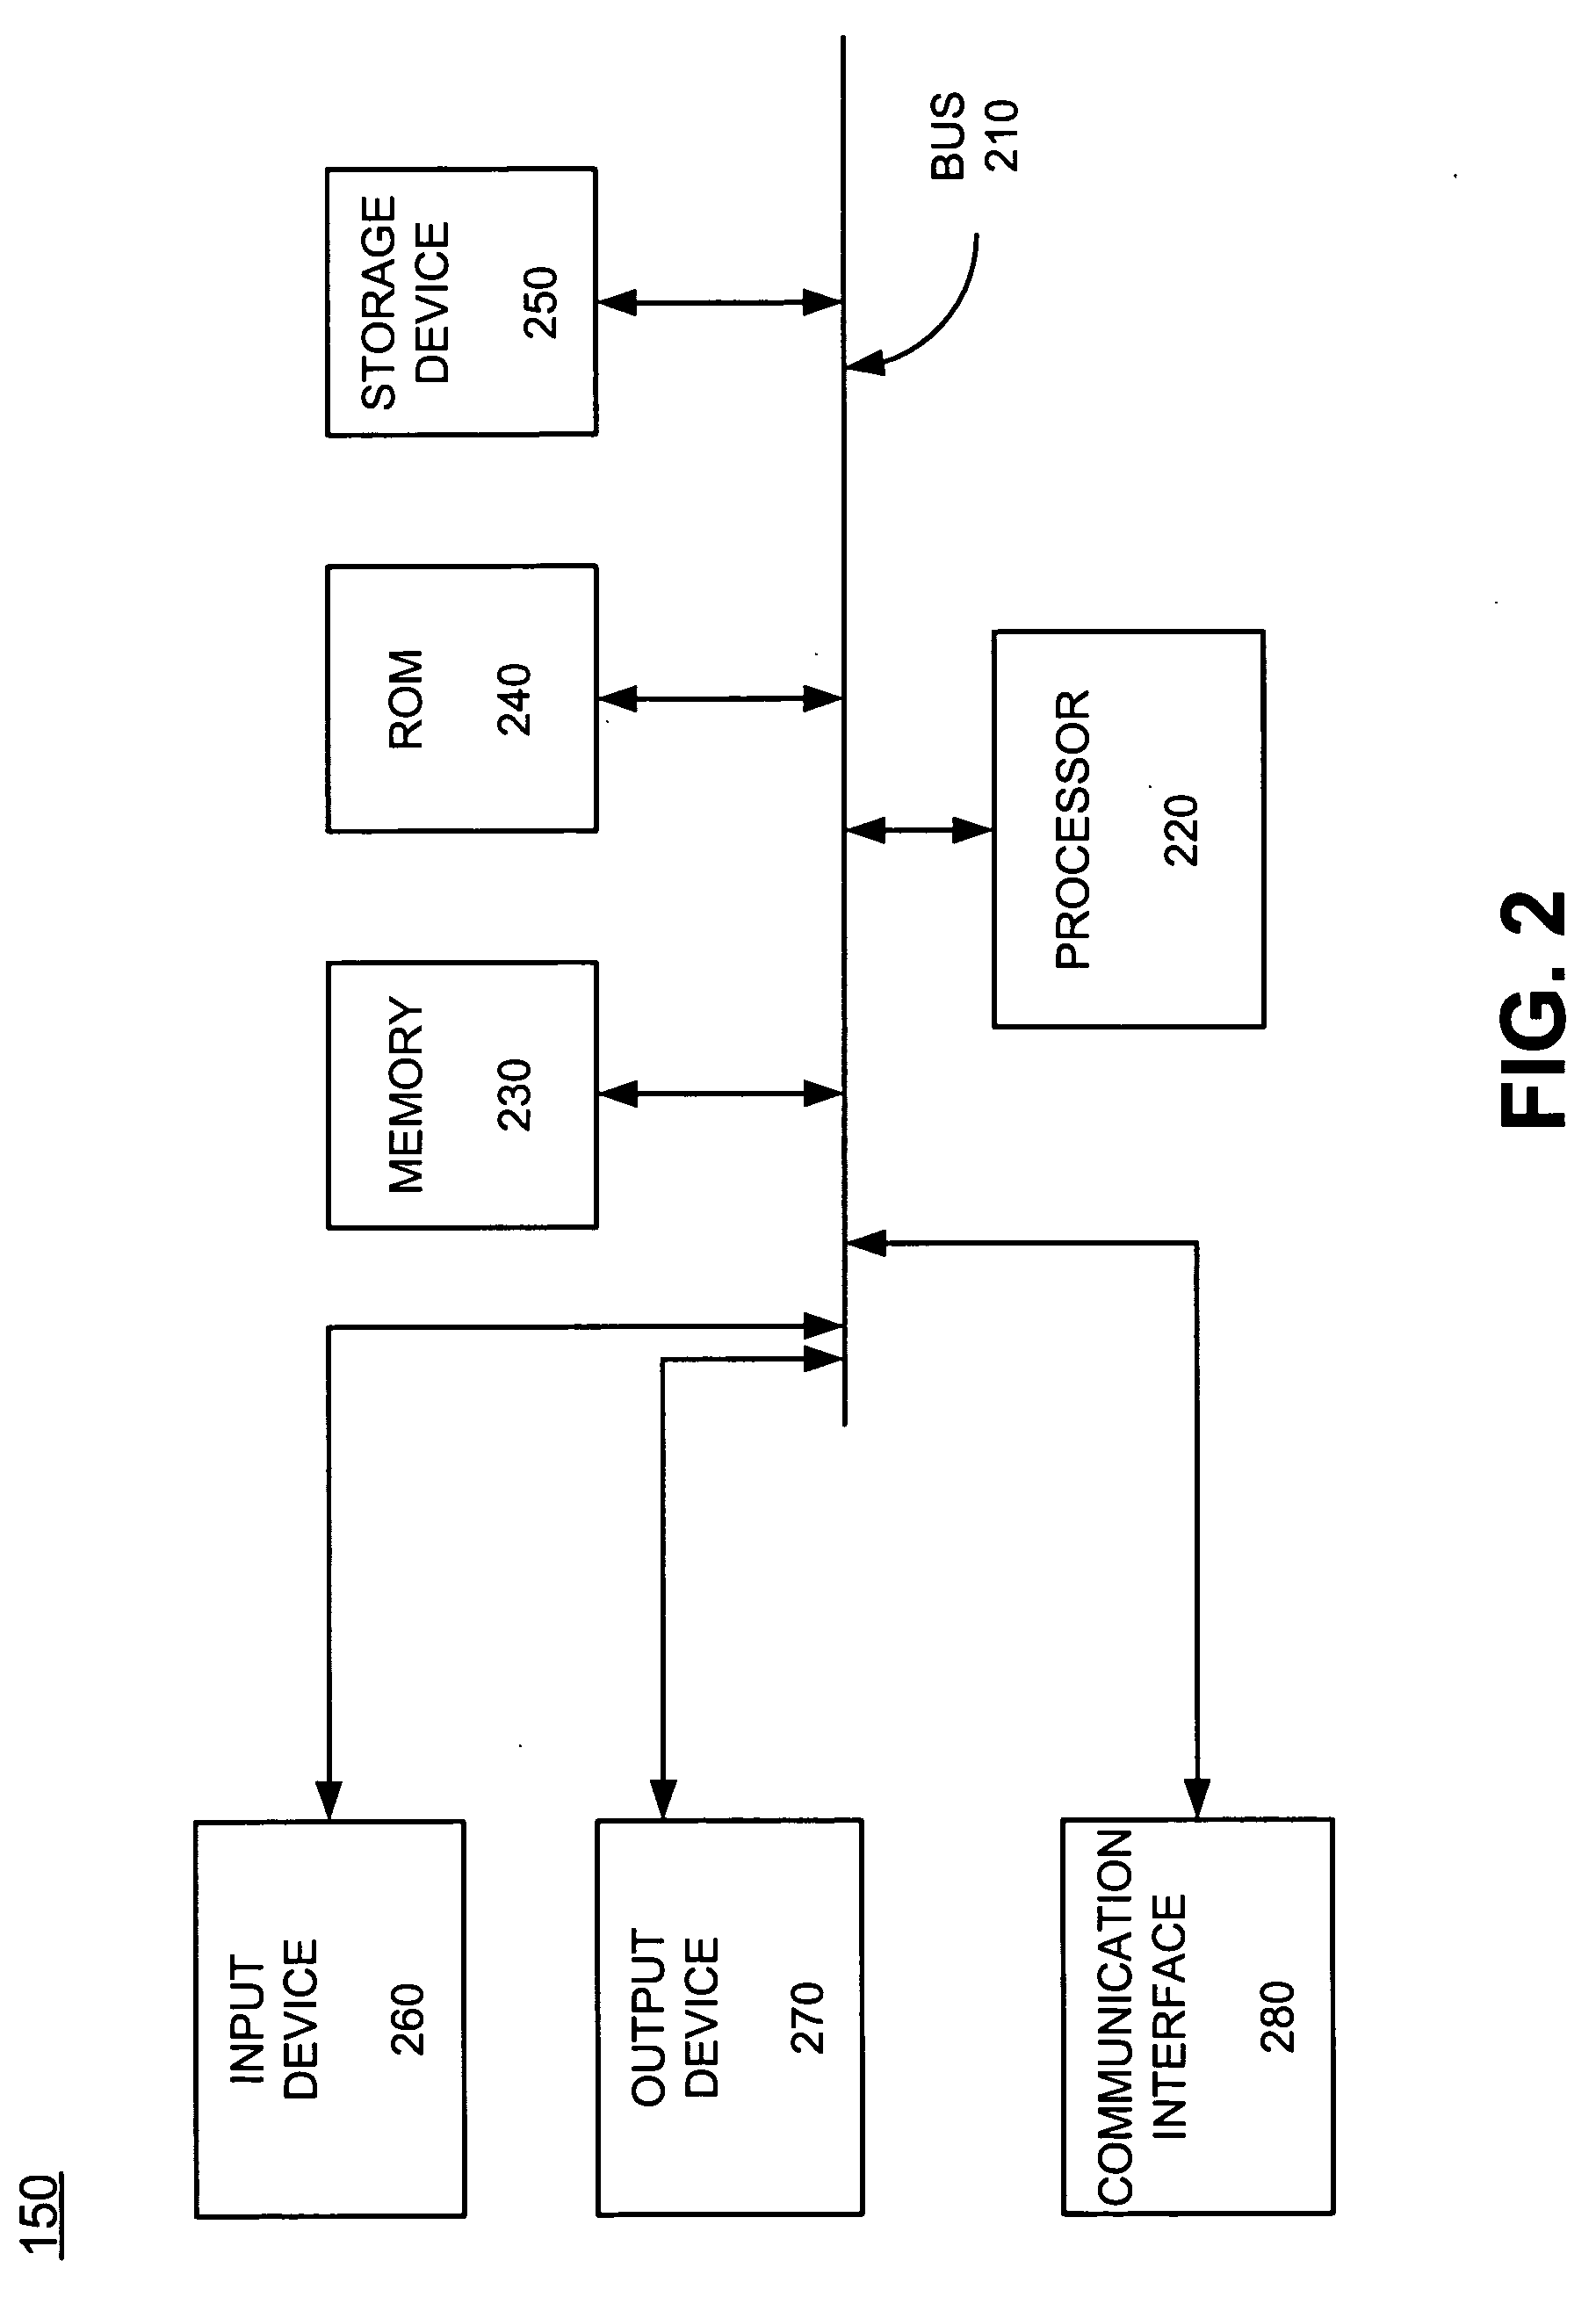 Systems and methods for performing risk analysis